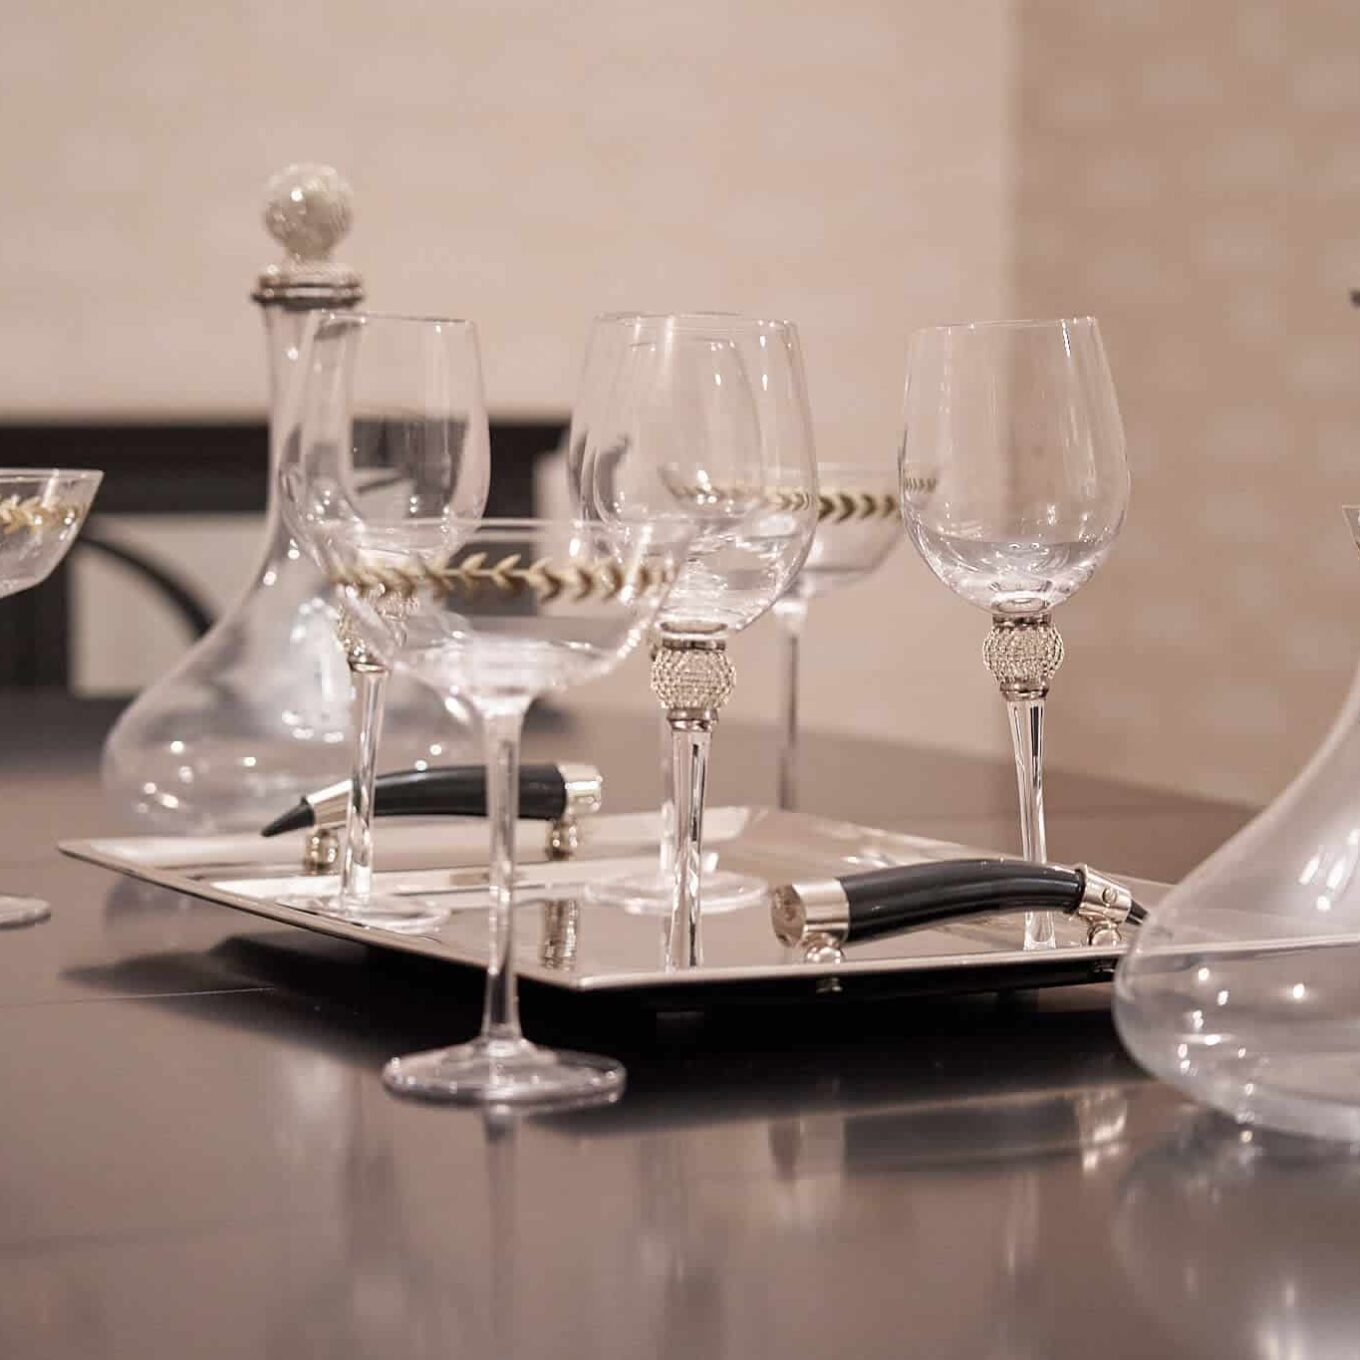 Wine glasses on care home dining table